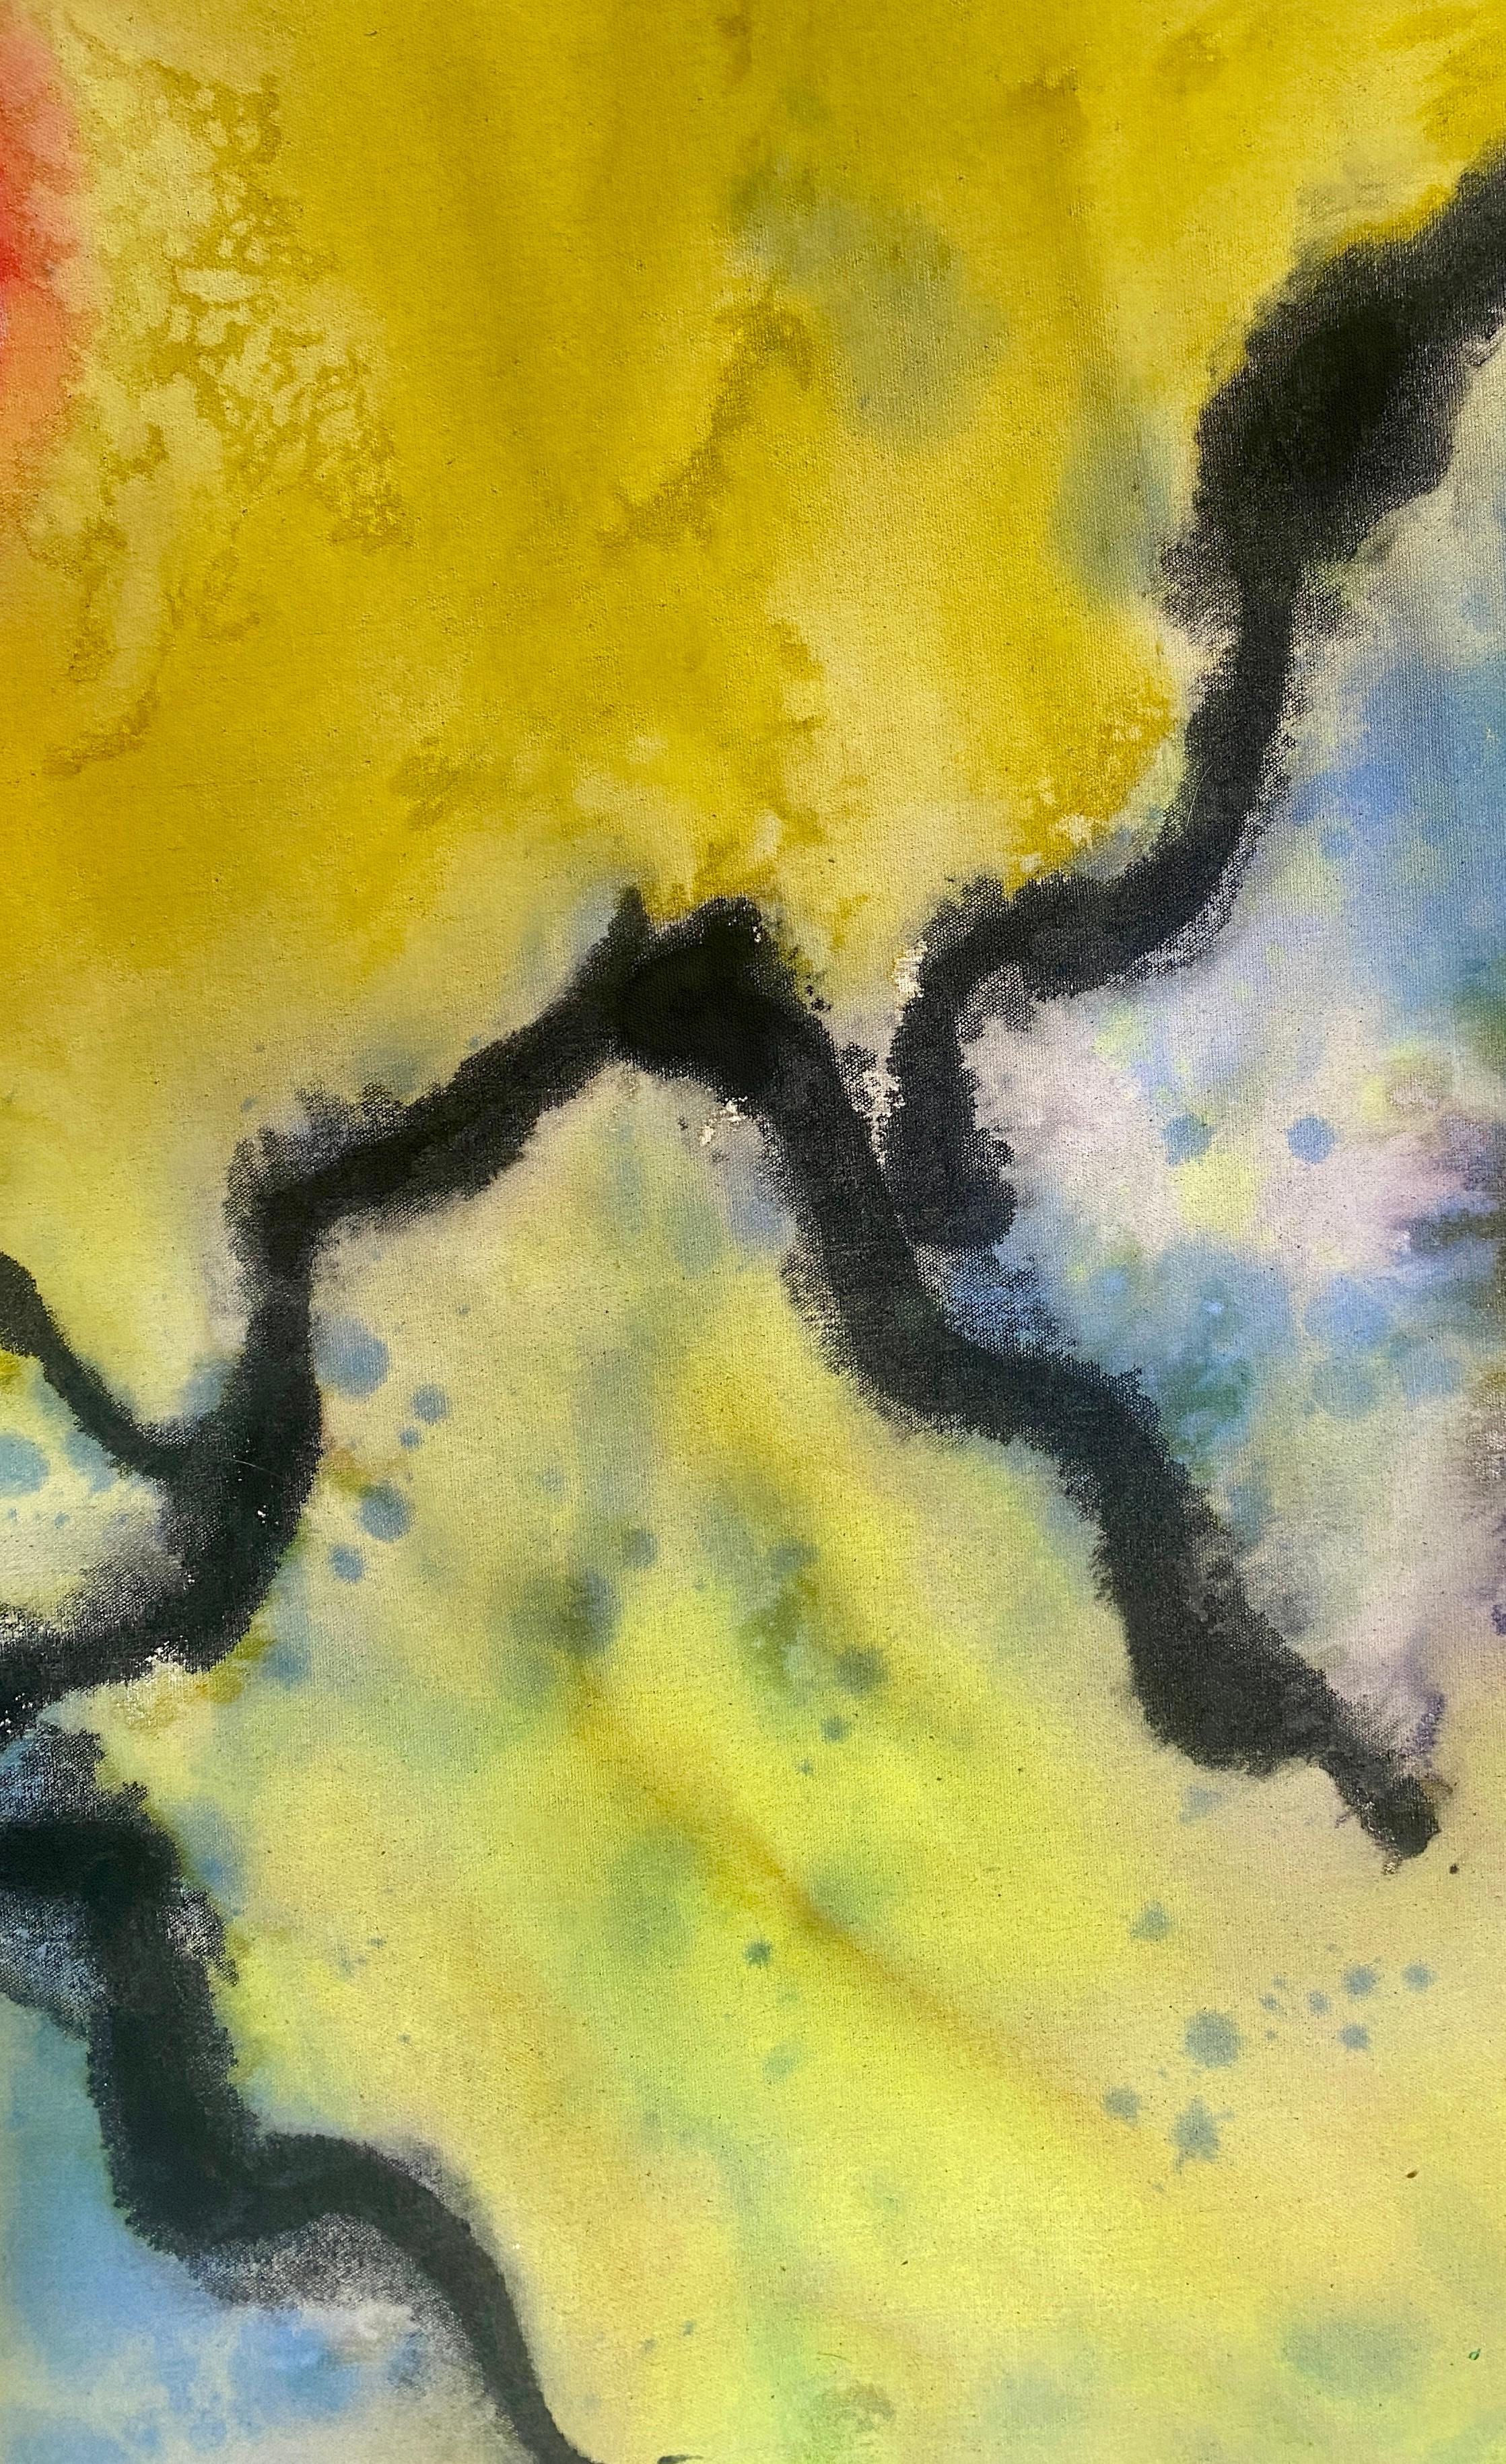 'Eden' - Colorful abstract landscape soak-stain painting, acrylic on raw canvas 28